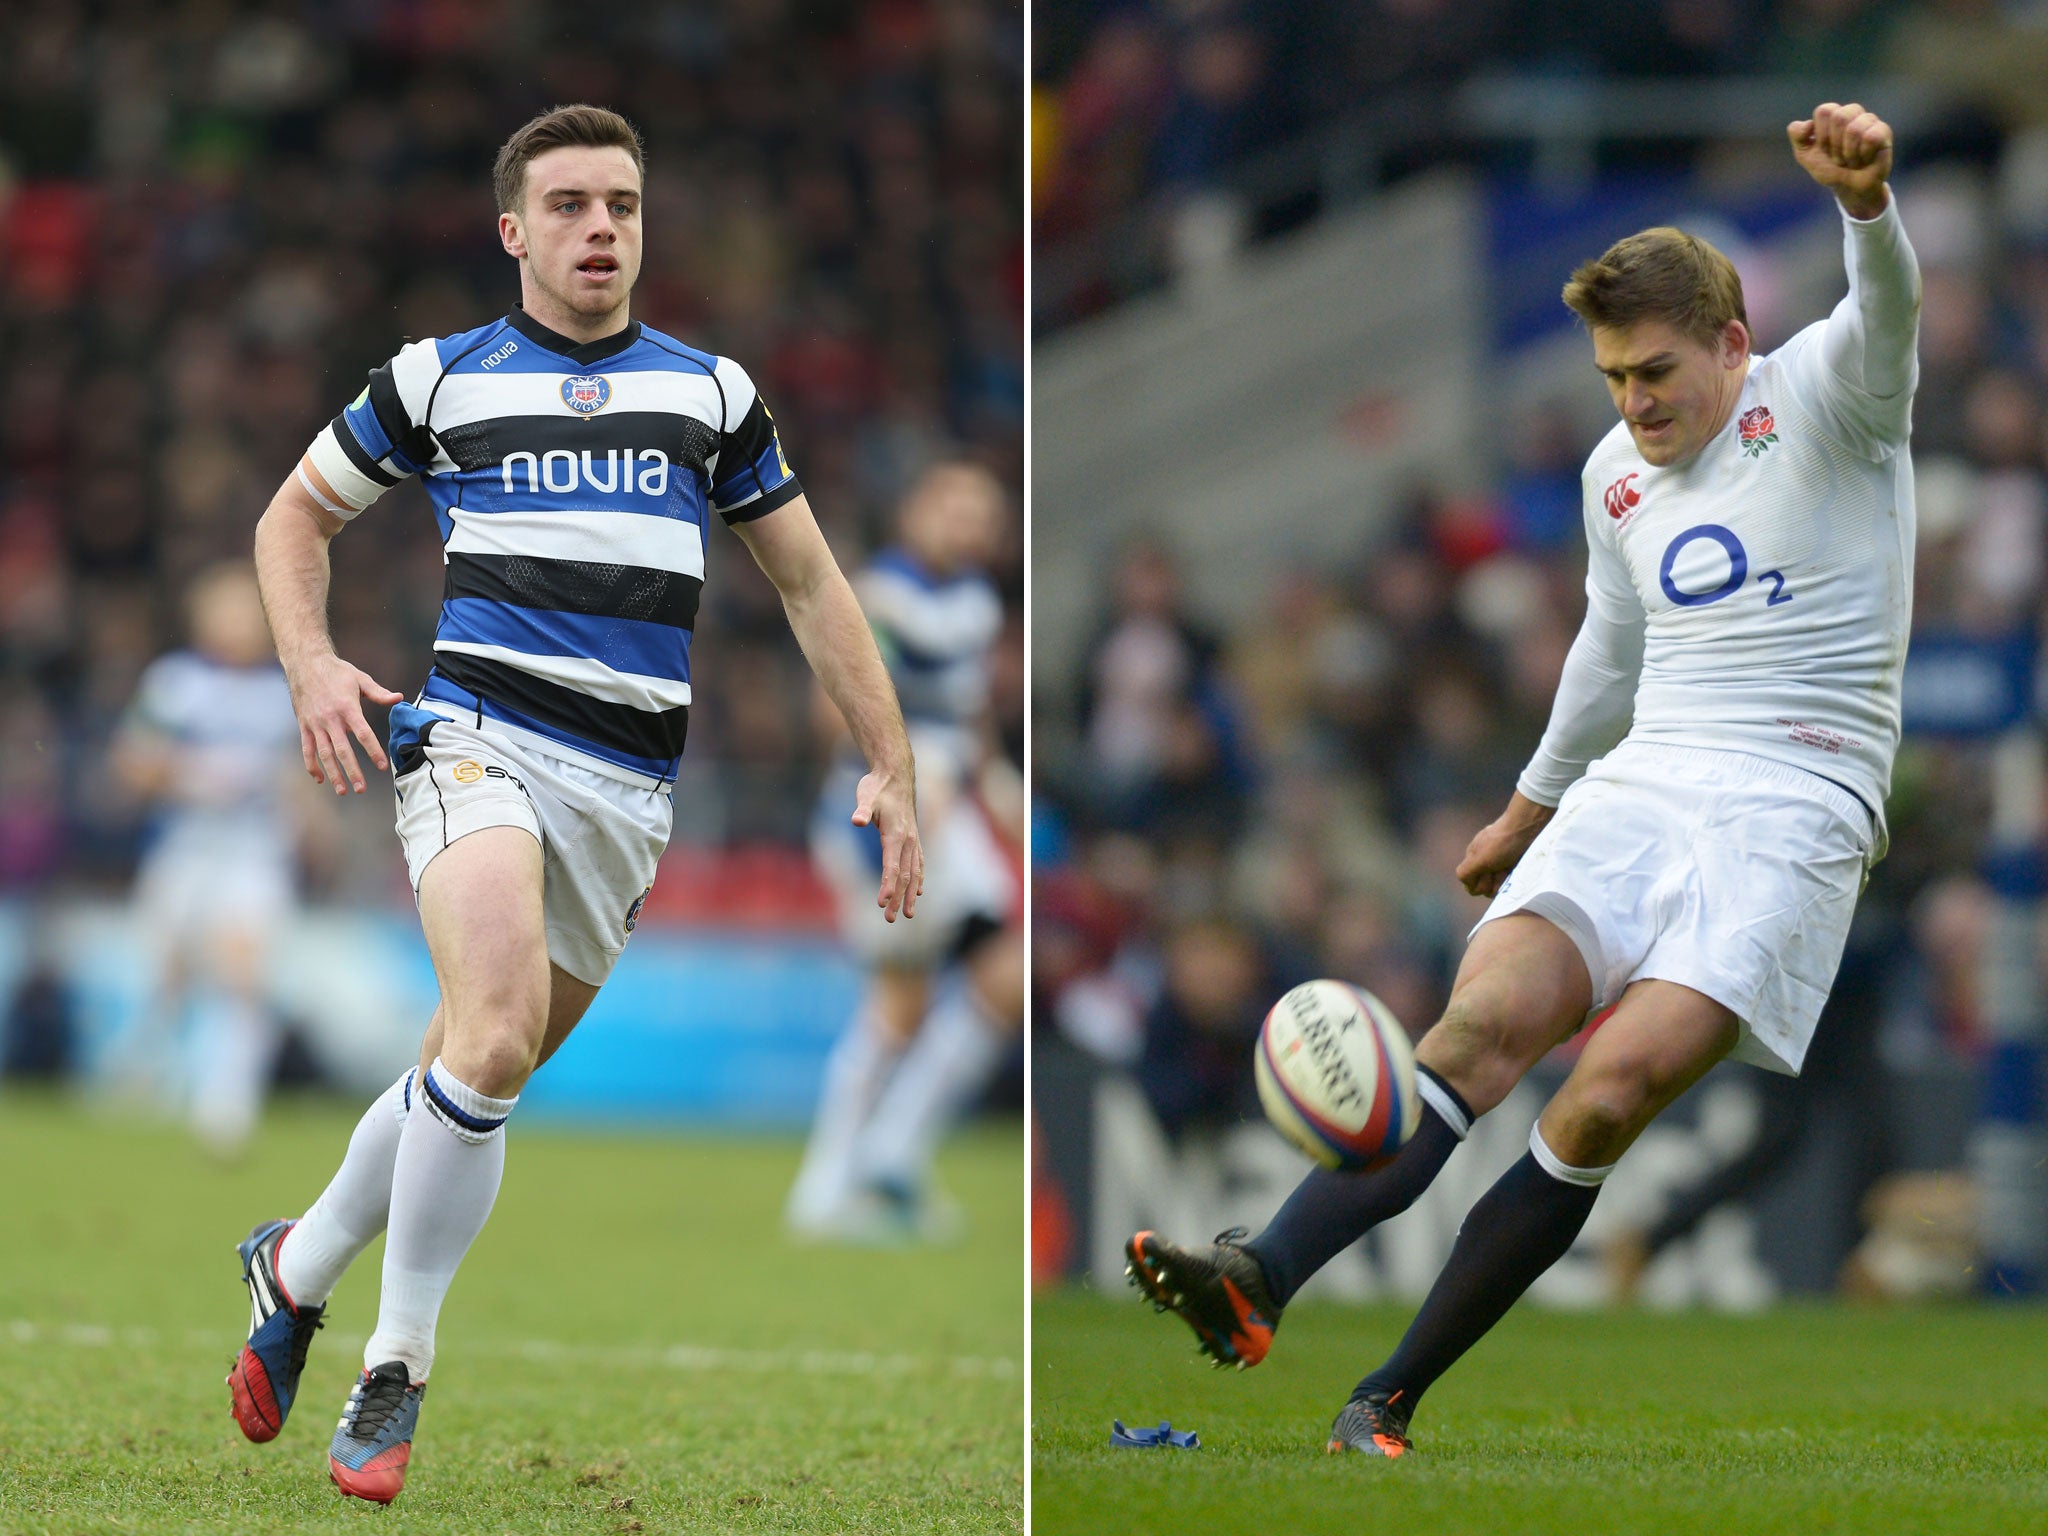 George Ford (L) has been named in the England EPS squad in place of Toby Flood (R)